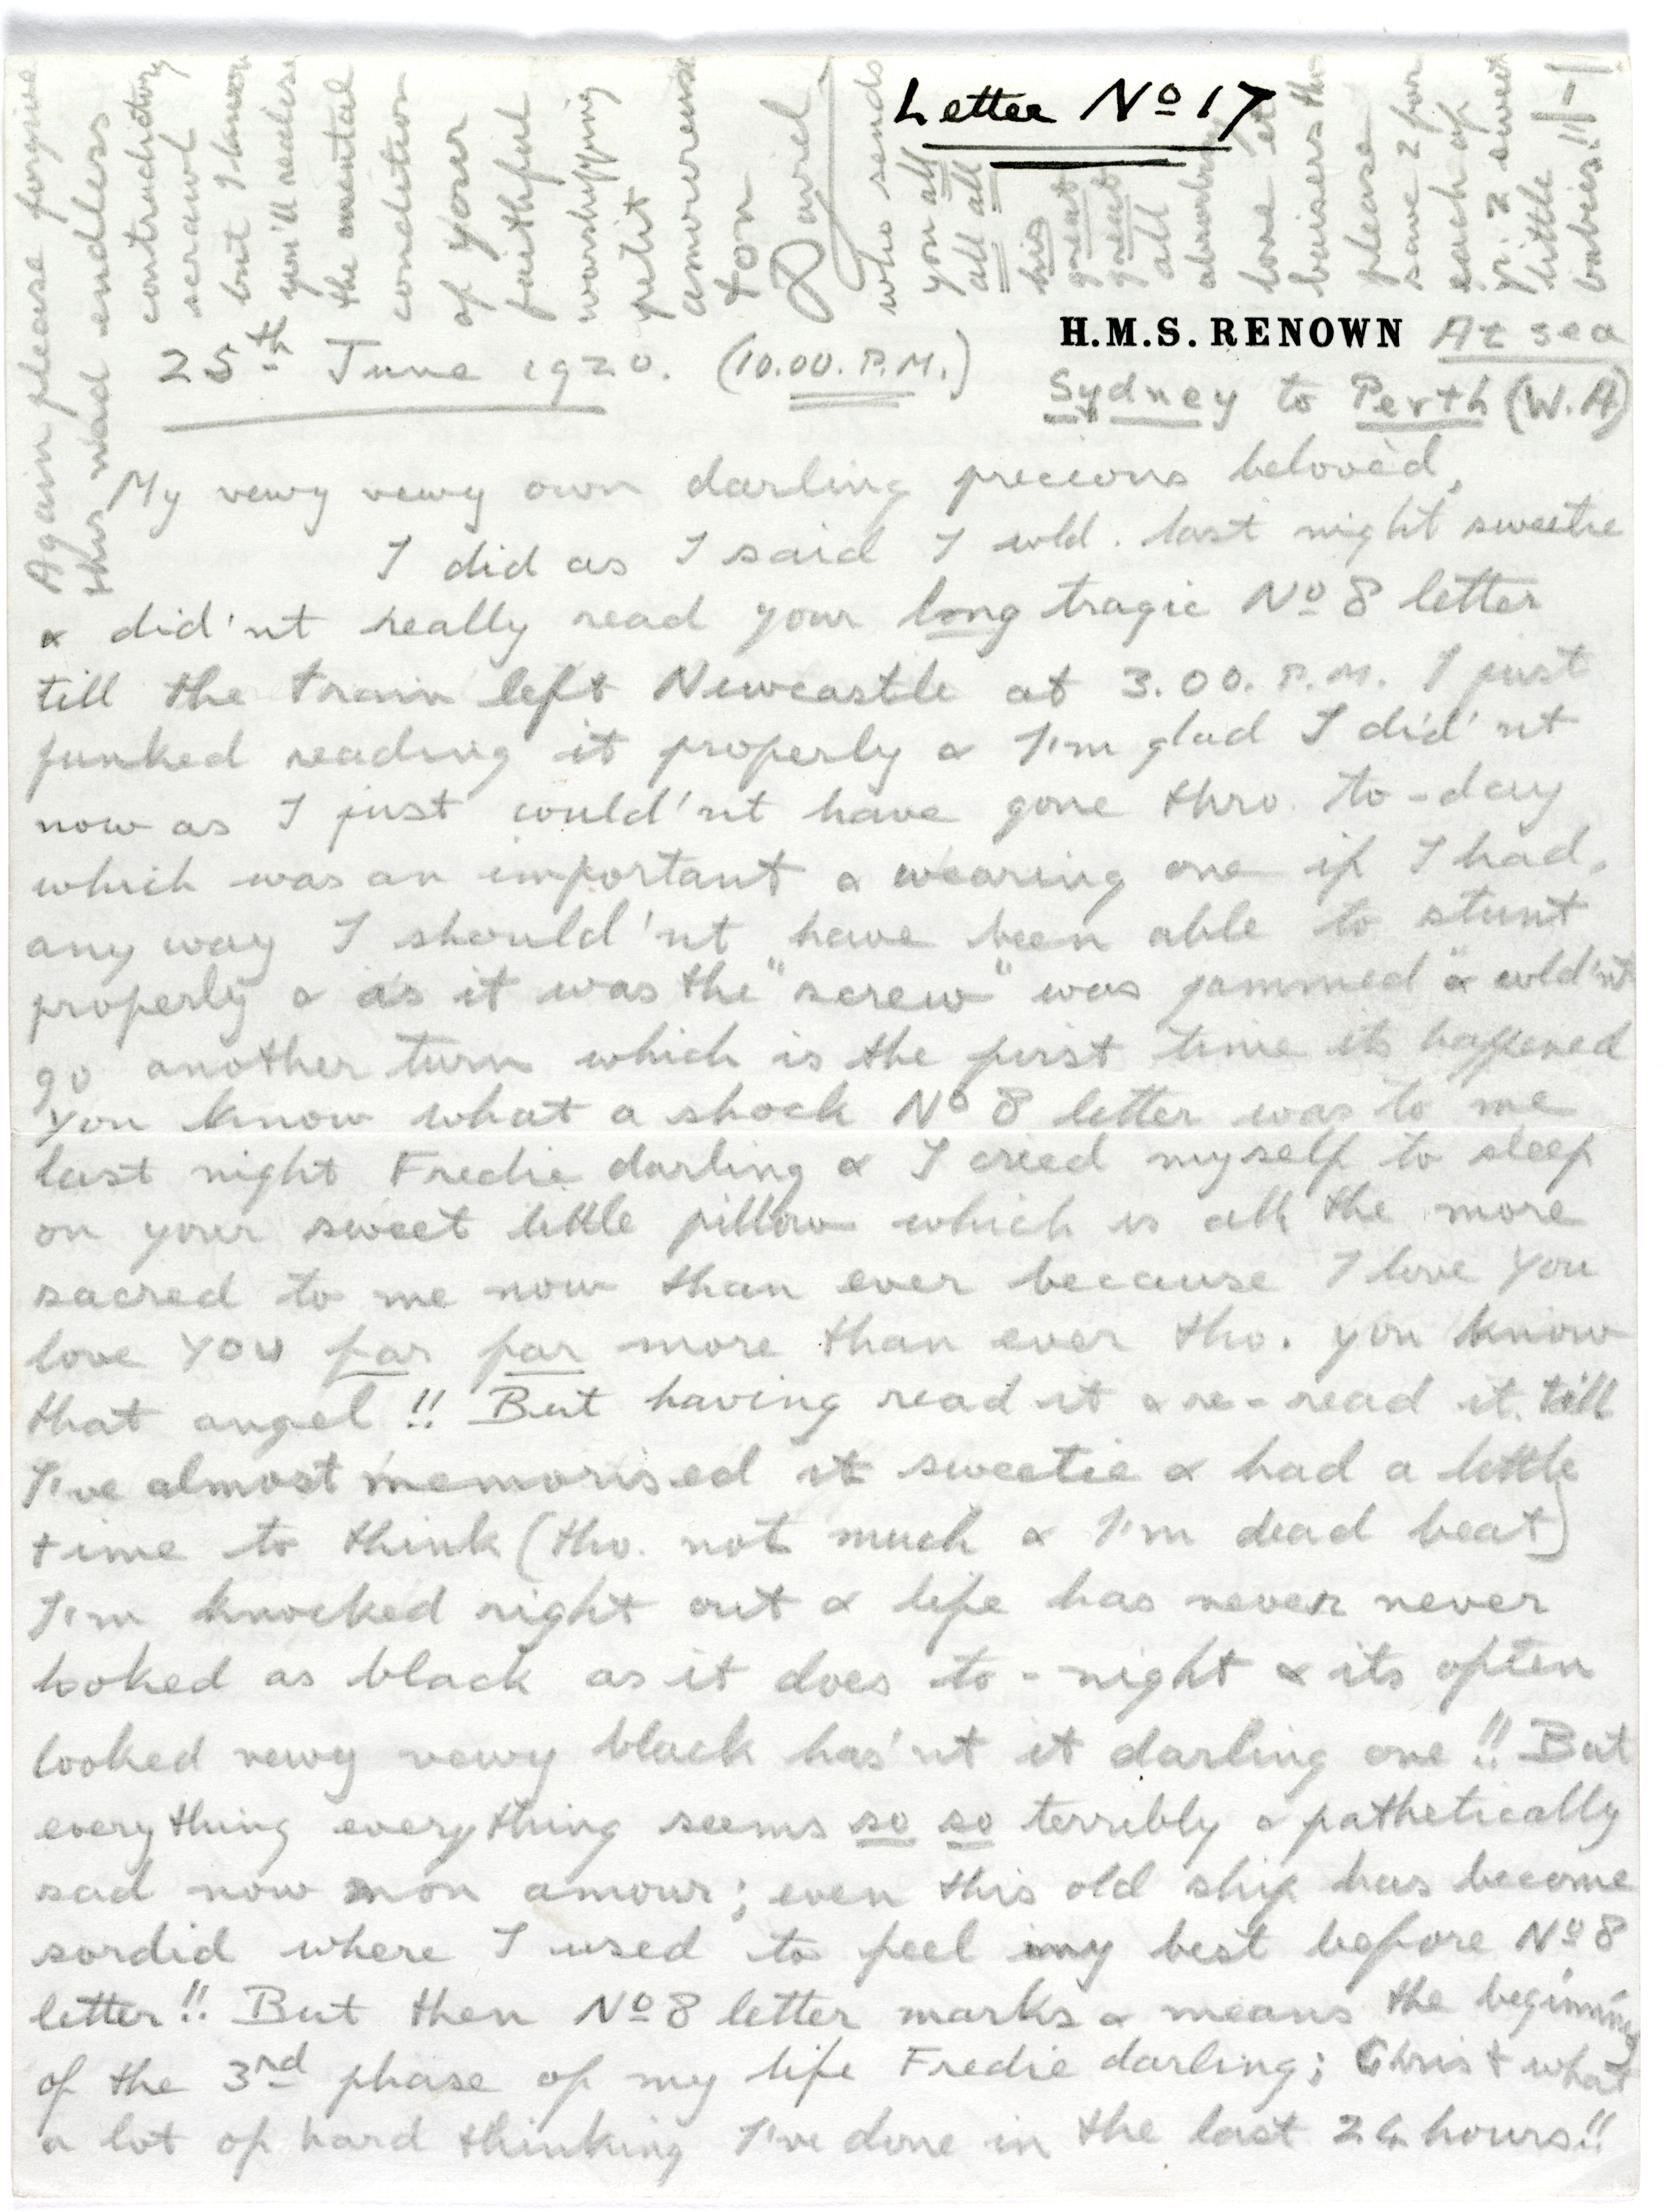 Image of a letter from Prince Edward to Freda